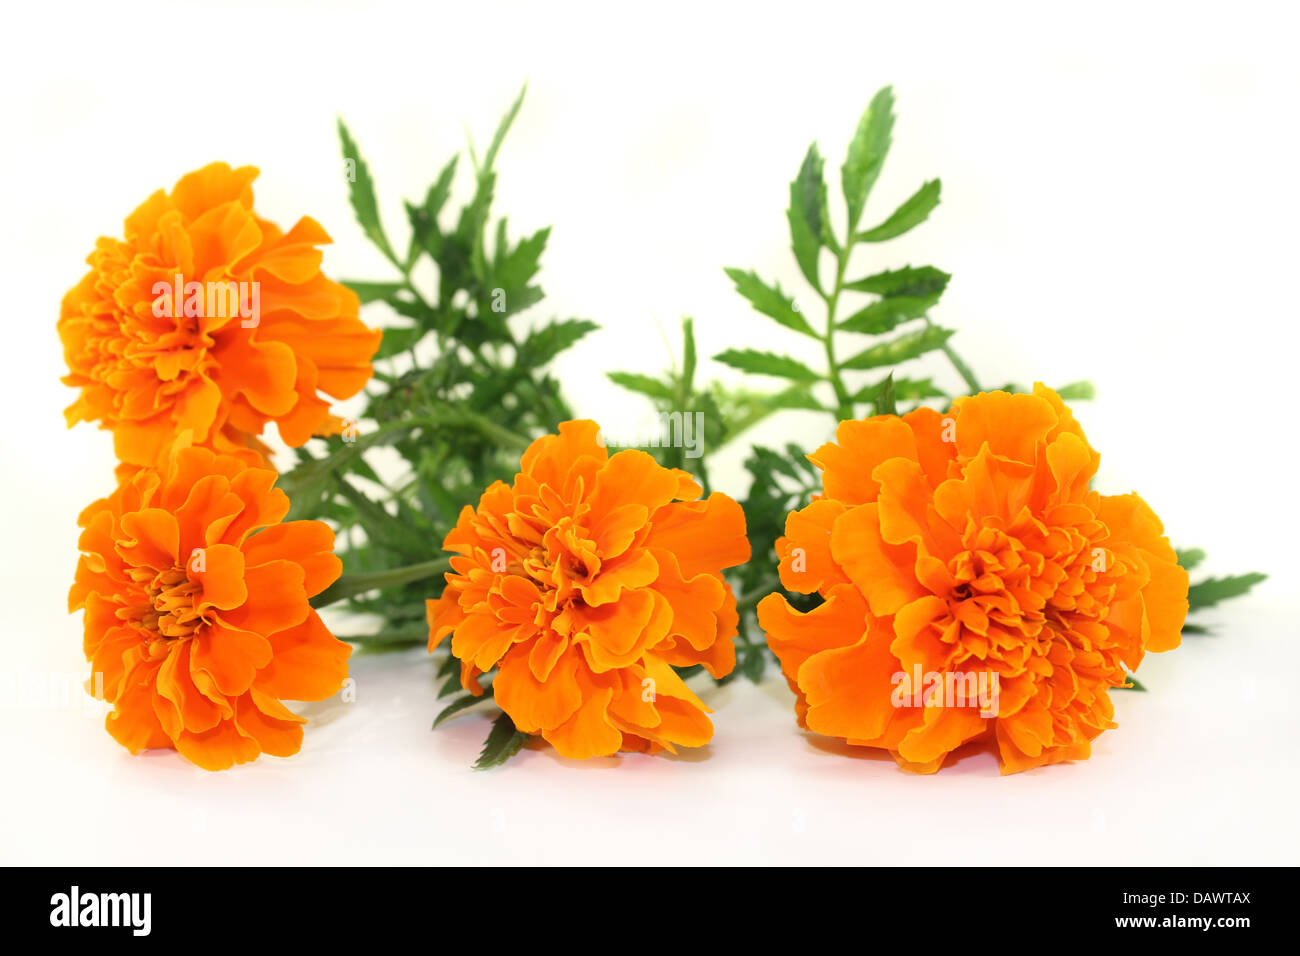 Tagetes flower and leaves against a white background Stock Photo - Alamy